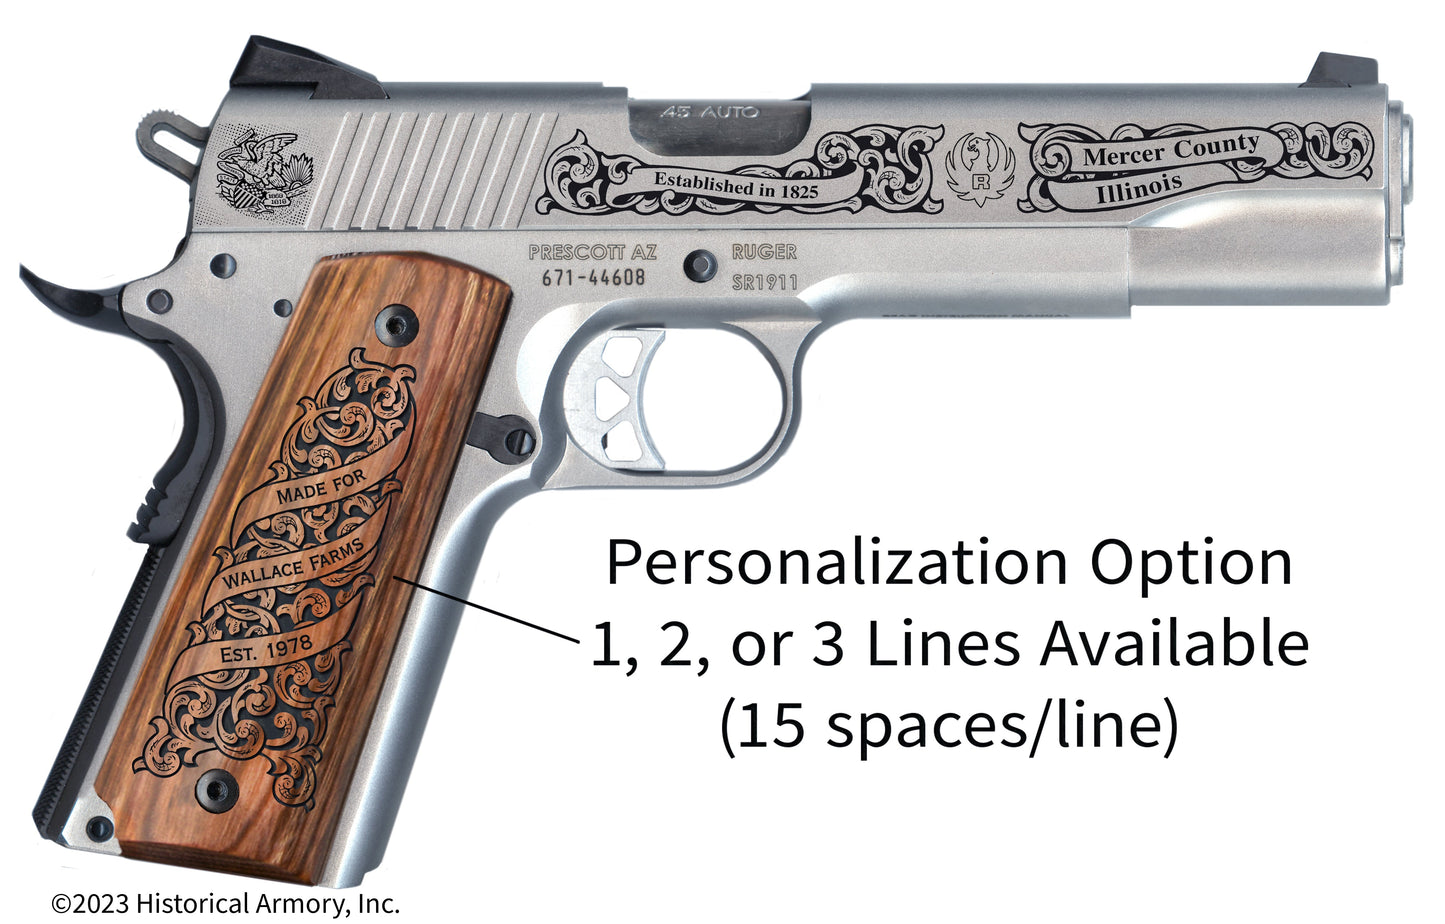 Mercer County Illinois Personalized Engraved .45 Auto Ruger 1911